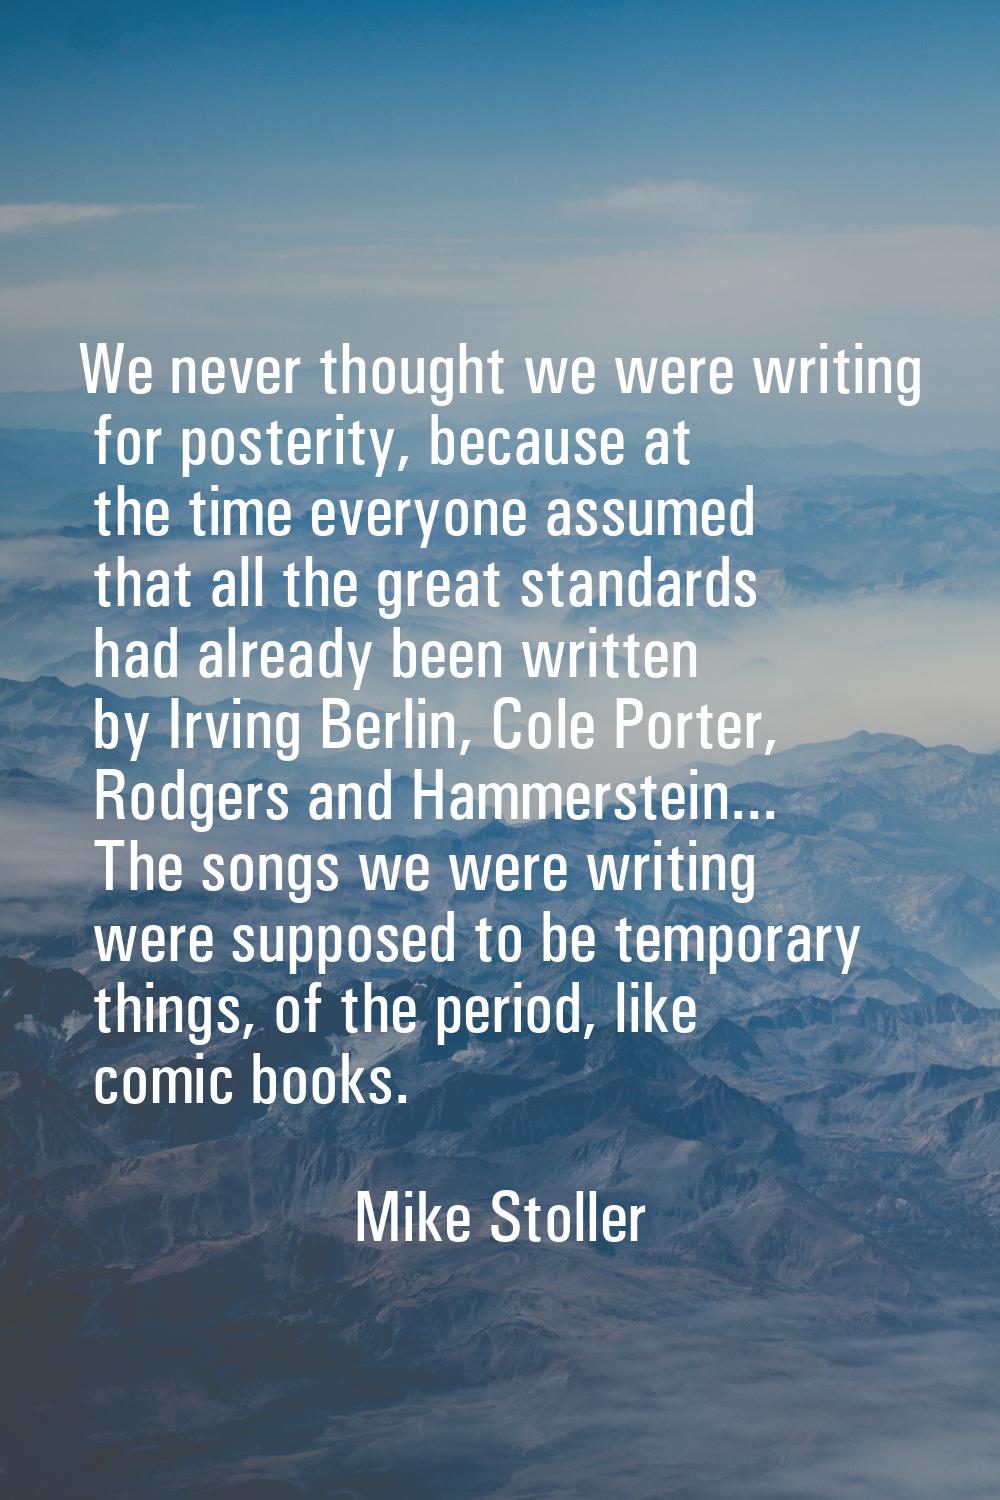 We never thought we were writing for posterity, because at the time everyone assumed that all the g